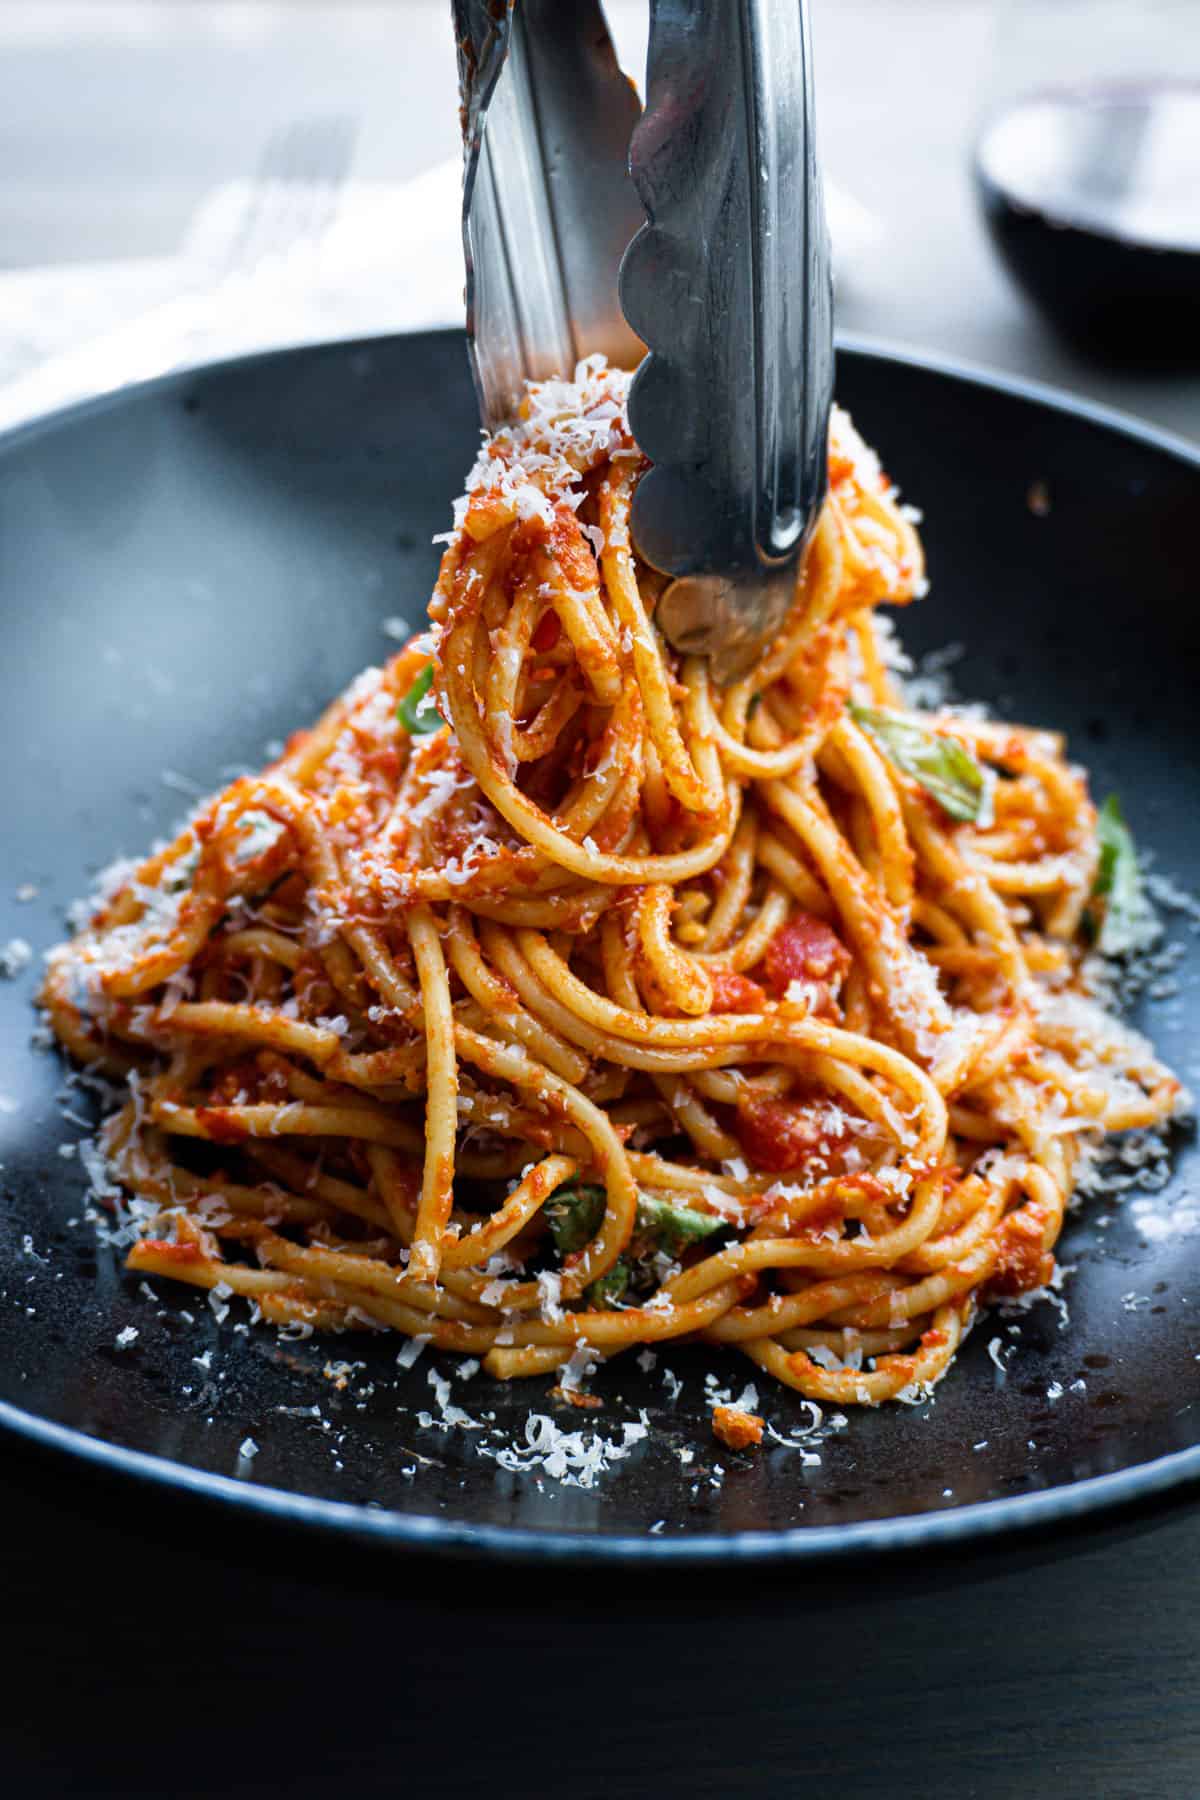 A plate of spaghetti arrabiata getting served with tongs.